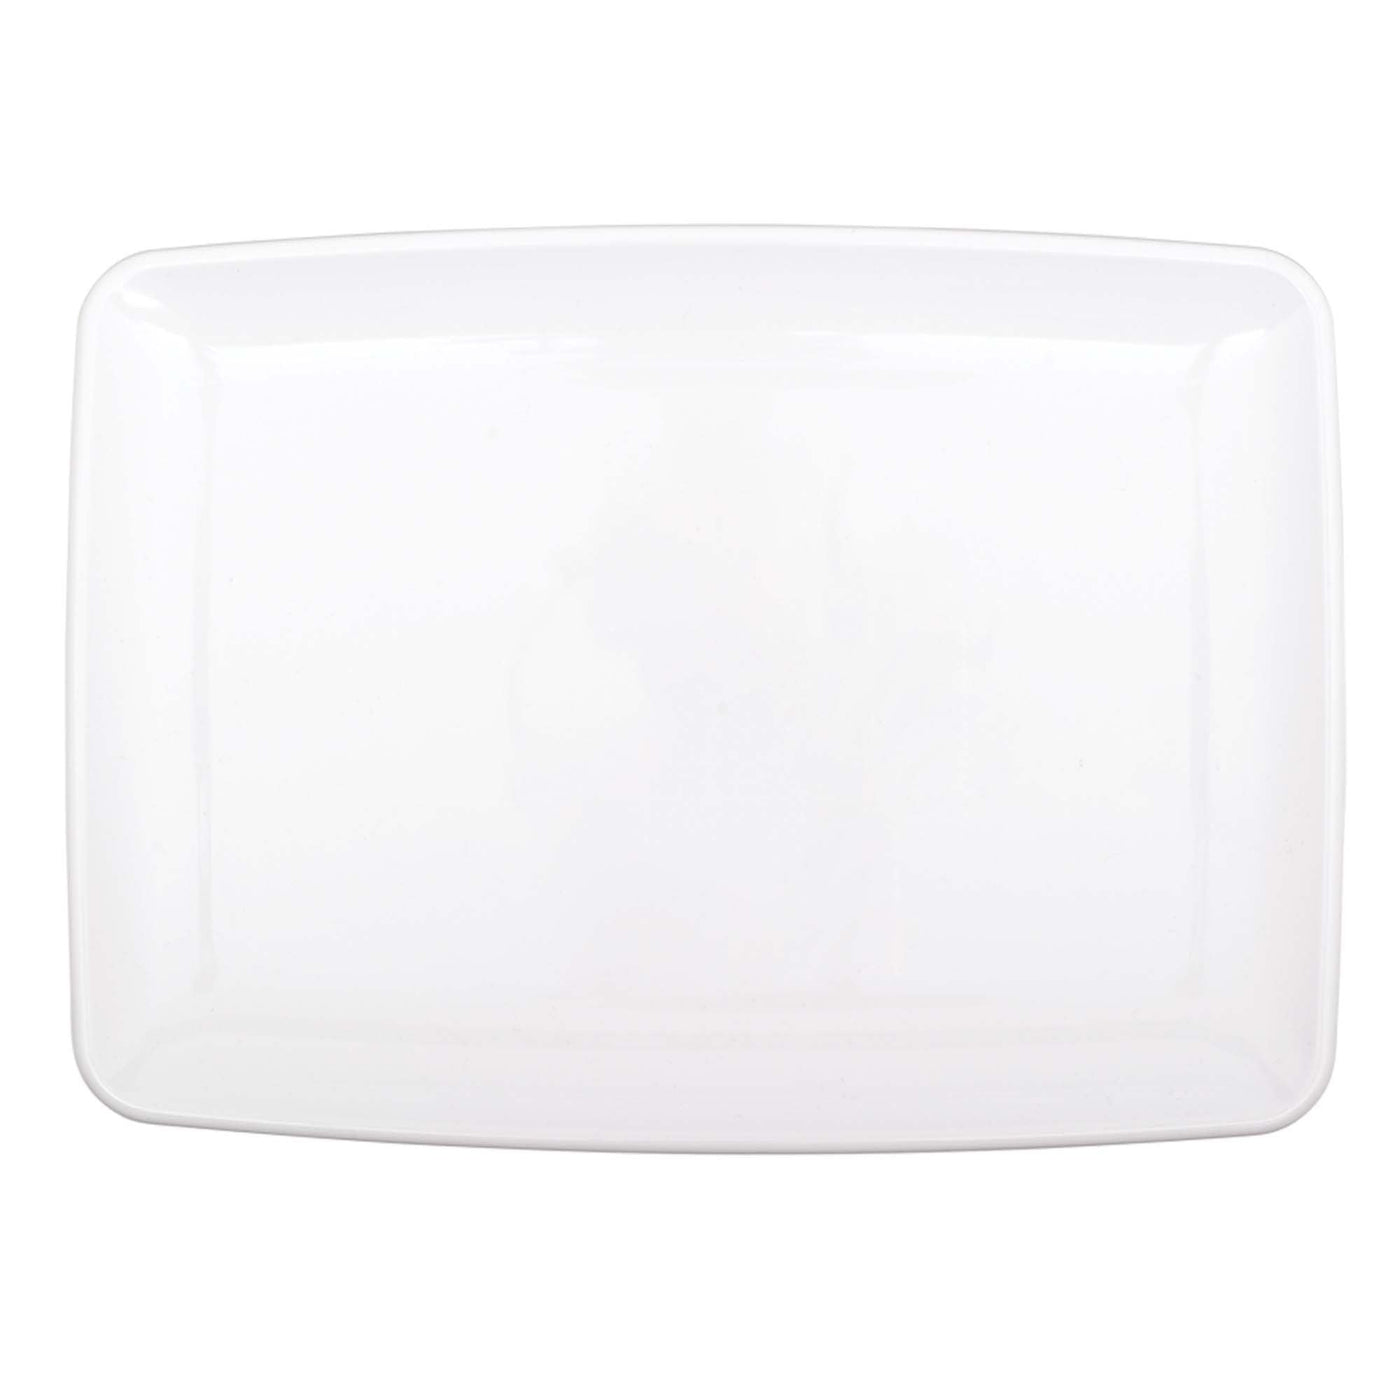 Small White Serving Tray - JJ's Party House